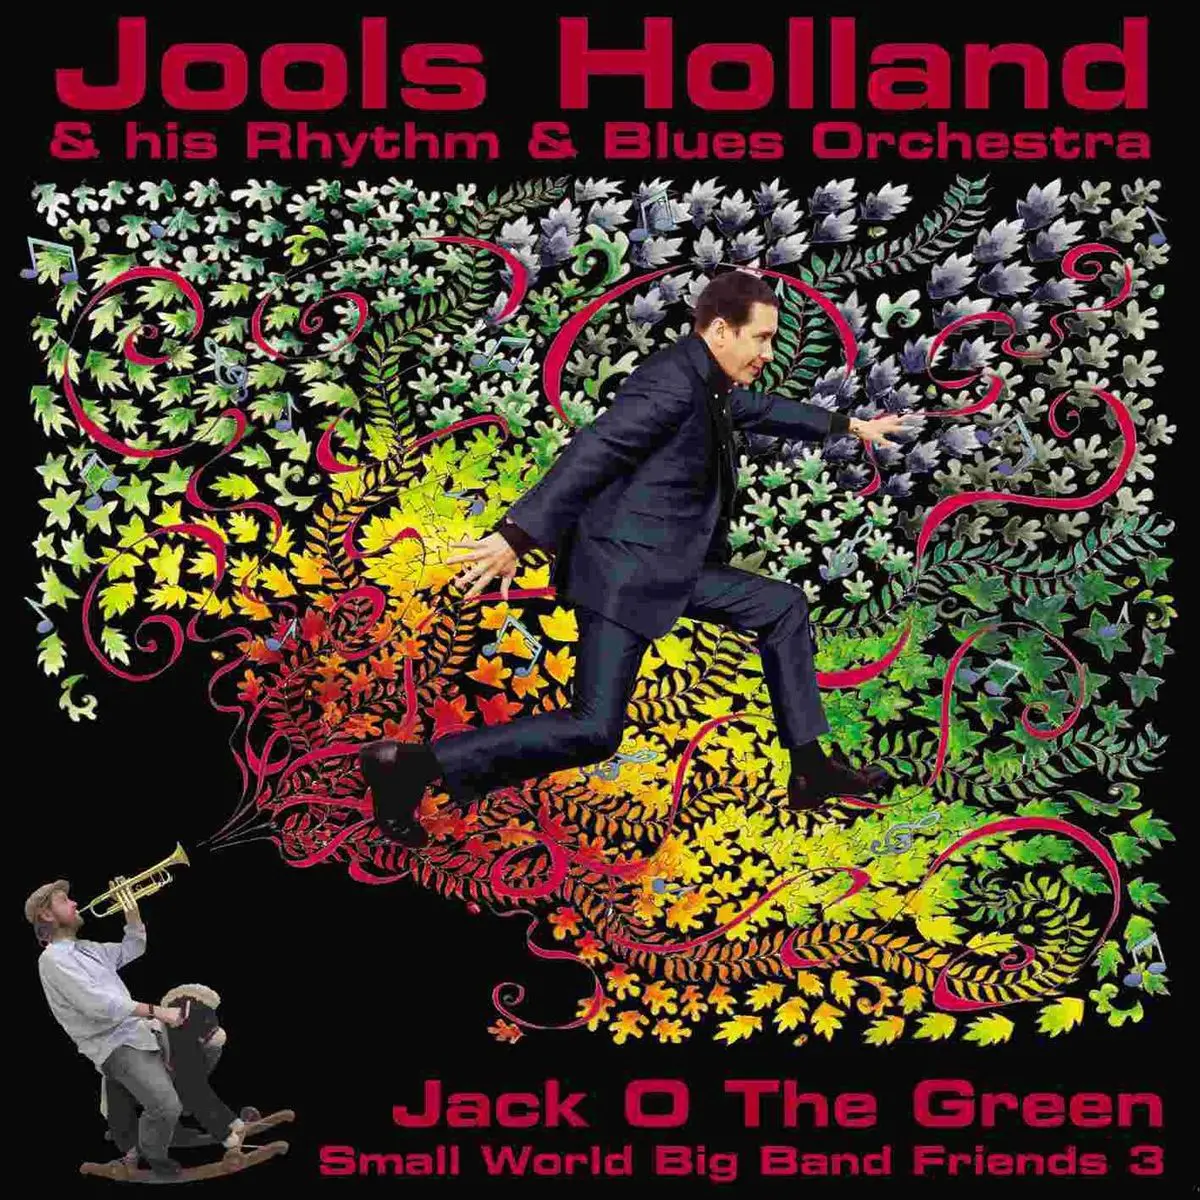 You Really Got A Hold On Me Lyrics In English Jack O The Green Small World Big Band Friends 3 You Really Got A Hold On Me Song Lyrics In English Free